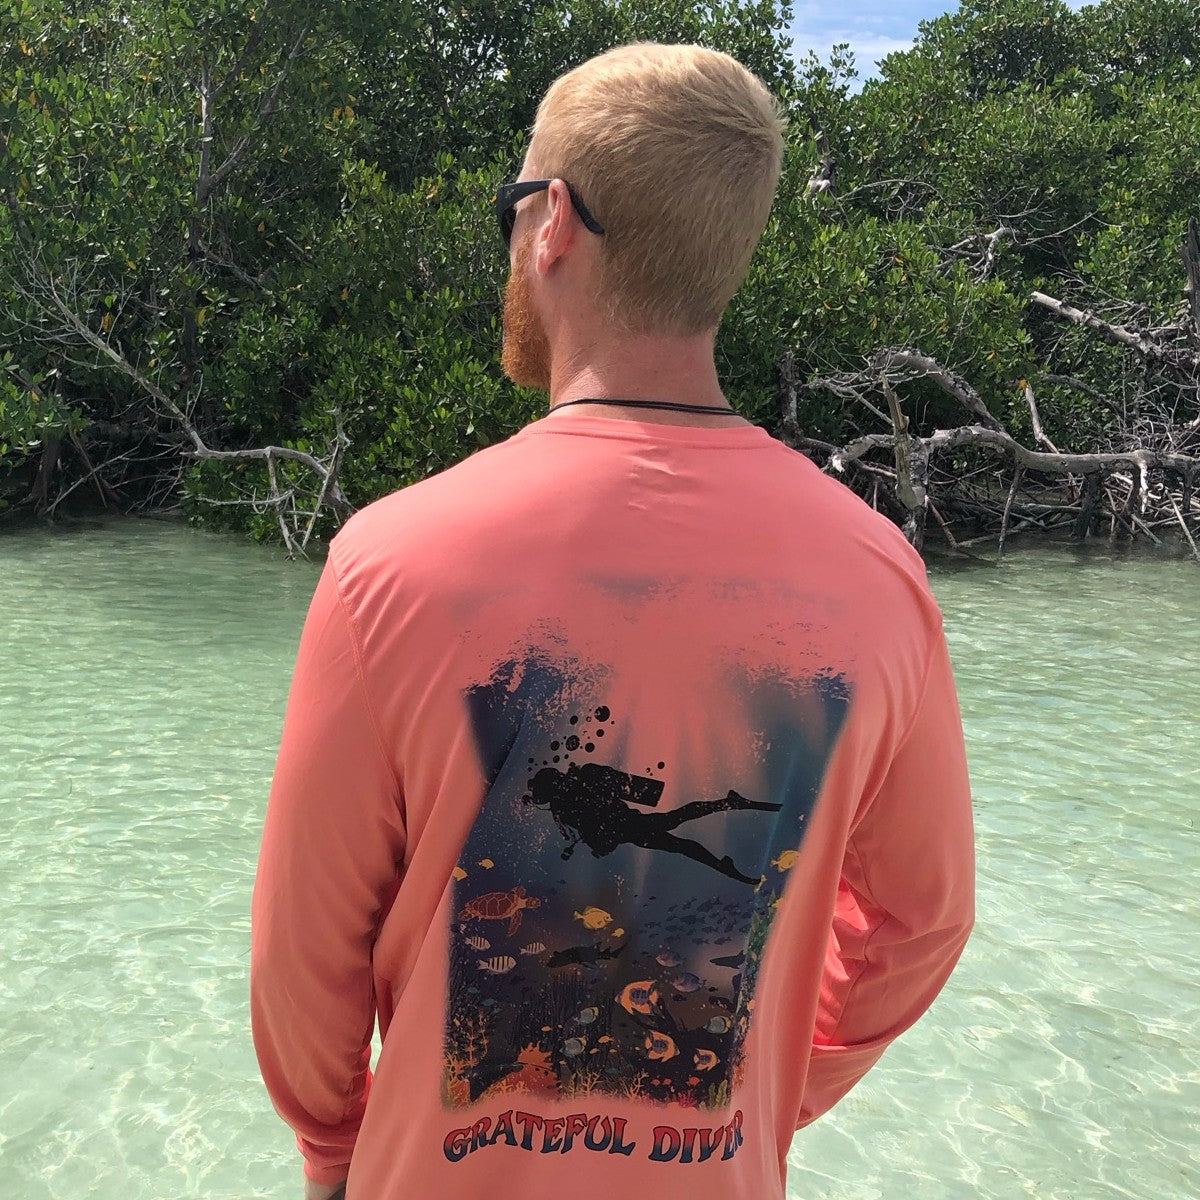 Grateful Diver Reef Diver UV Shirt in salmon on model showing back with mangroves in the background